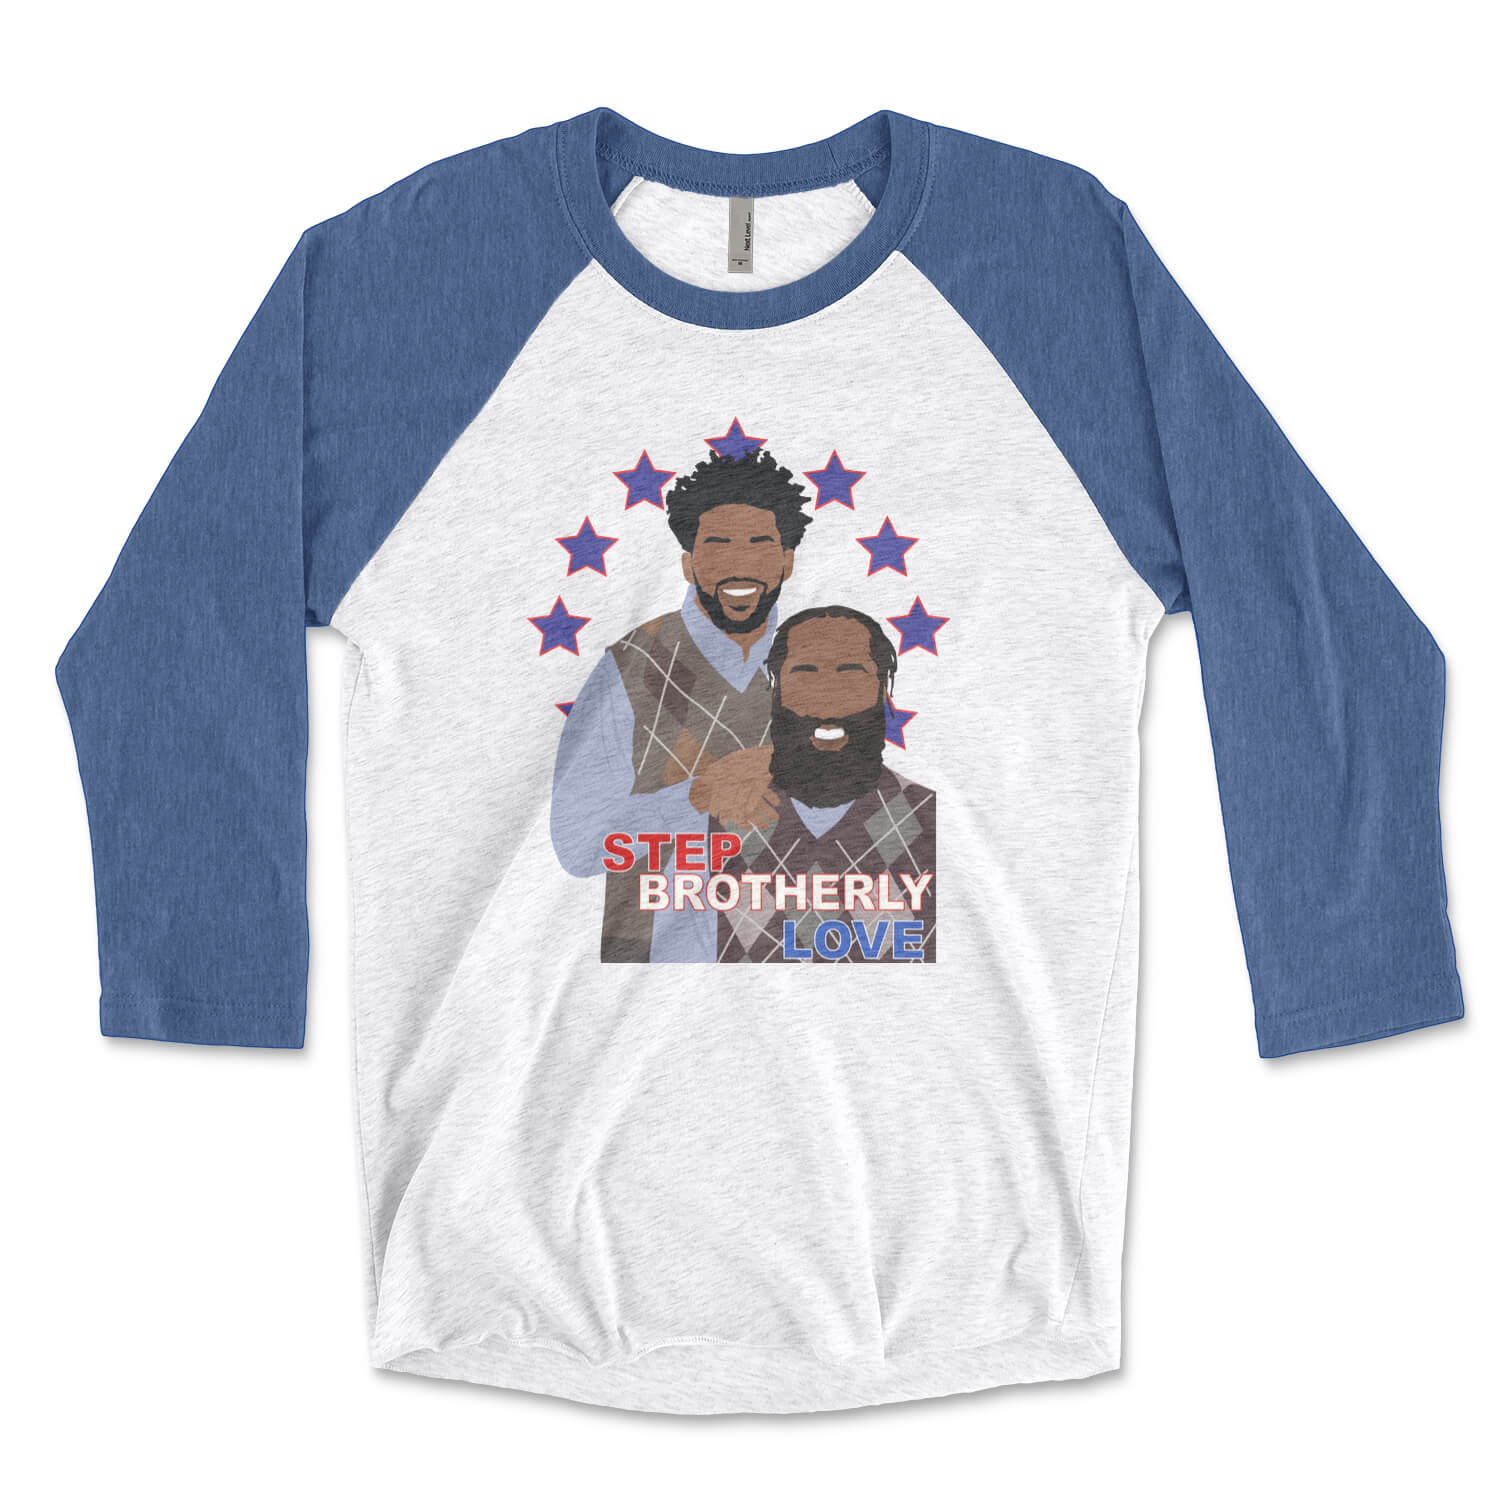 Philadelphia 76ers Joel Embiid & James Harden Step Brothers Sixers blue & white raglan t-shirt from Phillygoat